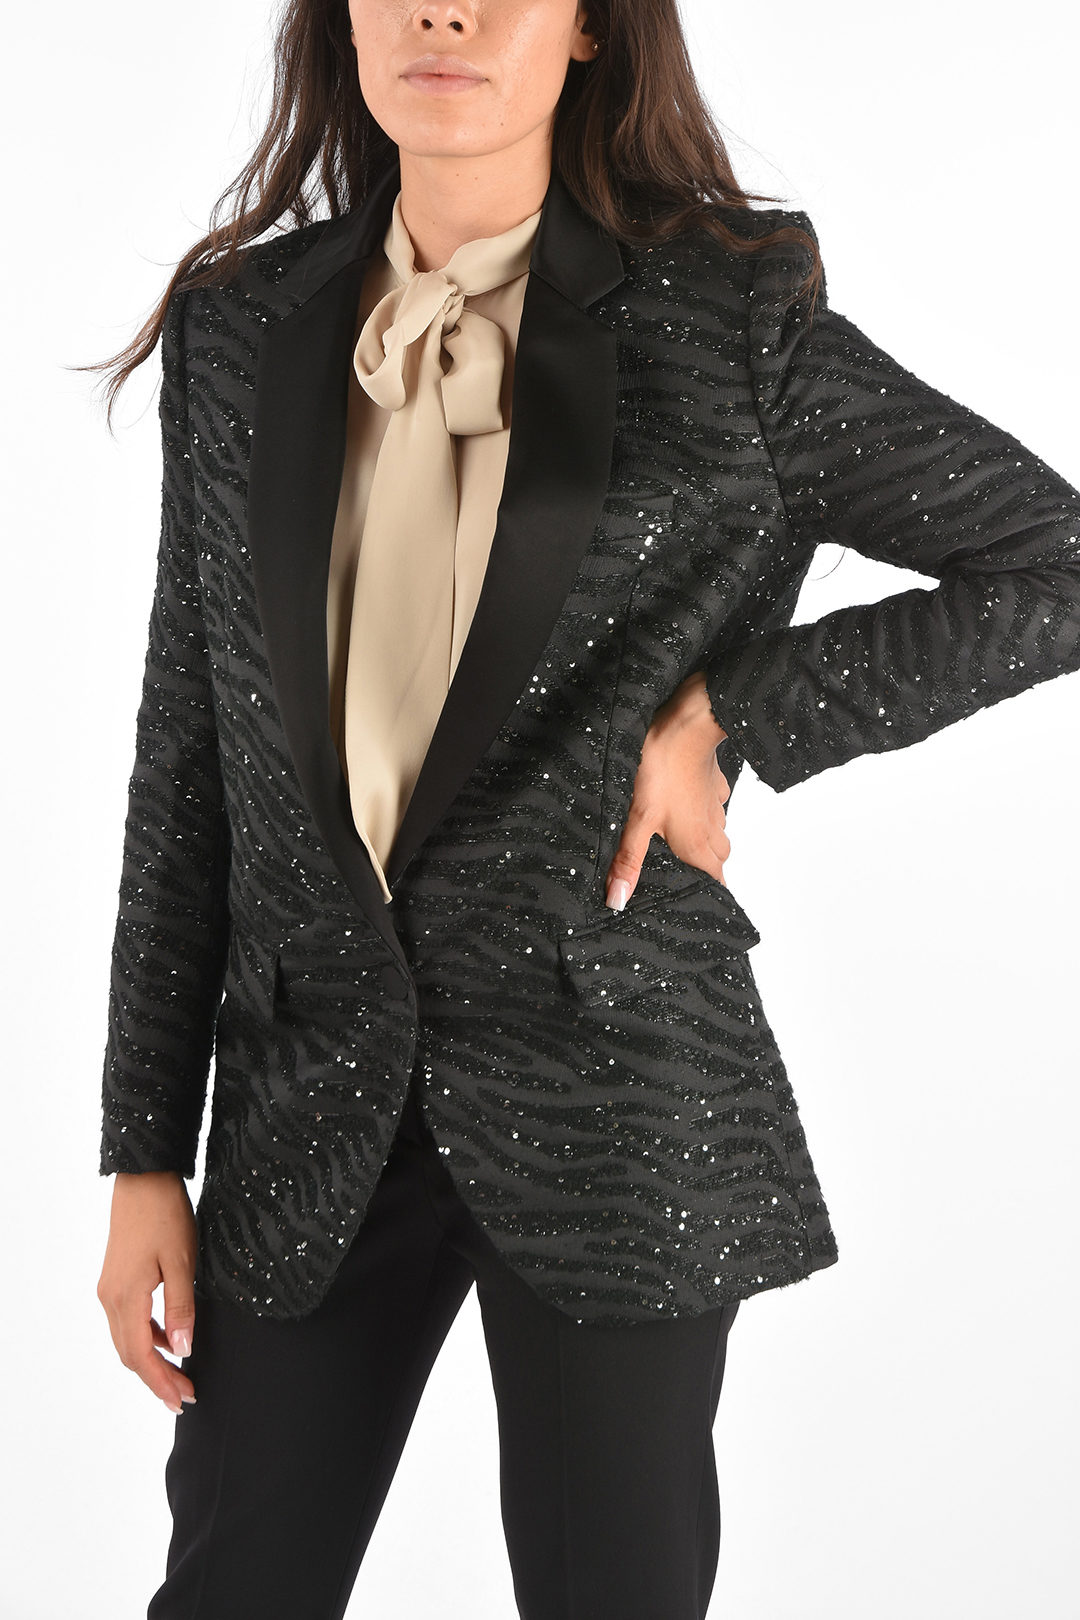 Michael Kors Lined Sequined Jewel Embroidered Blazer women - Glamood Outlet